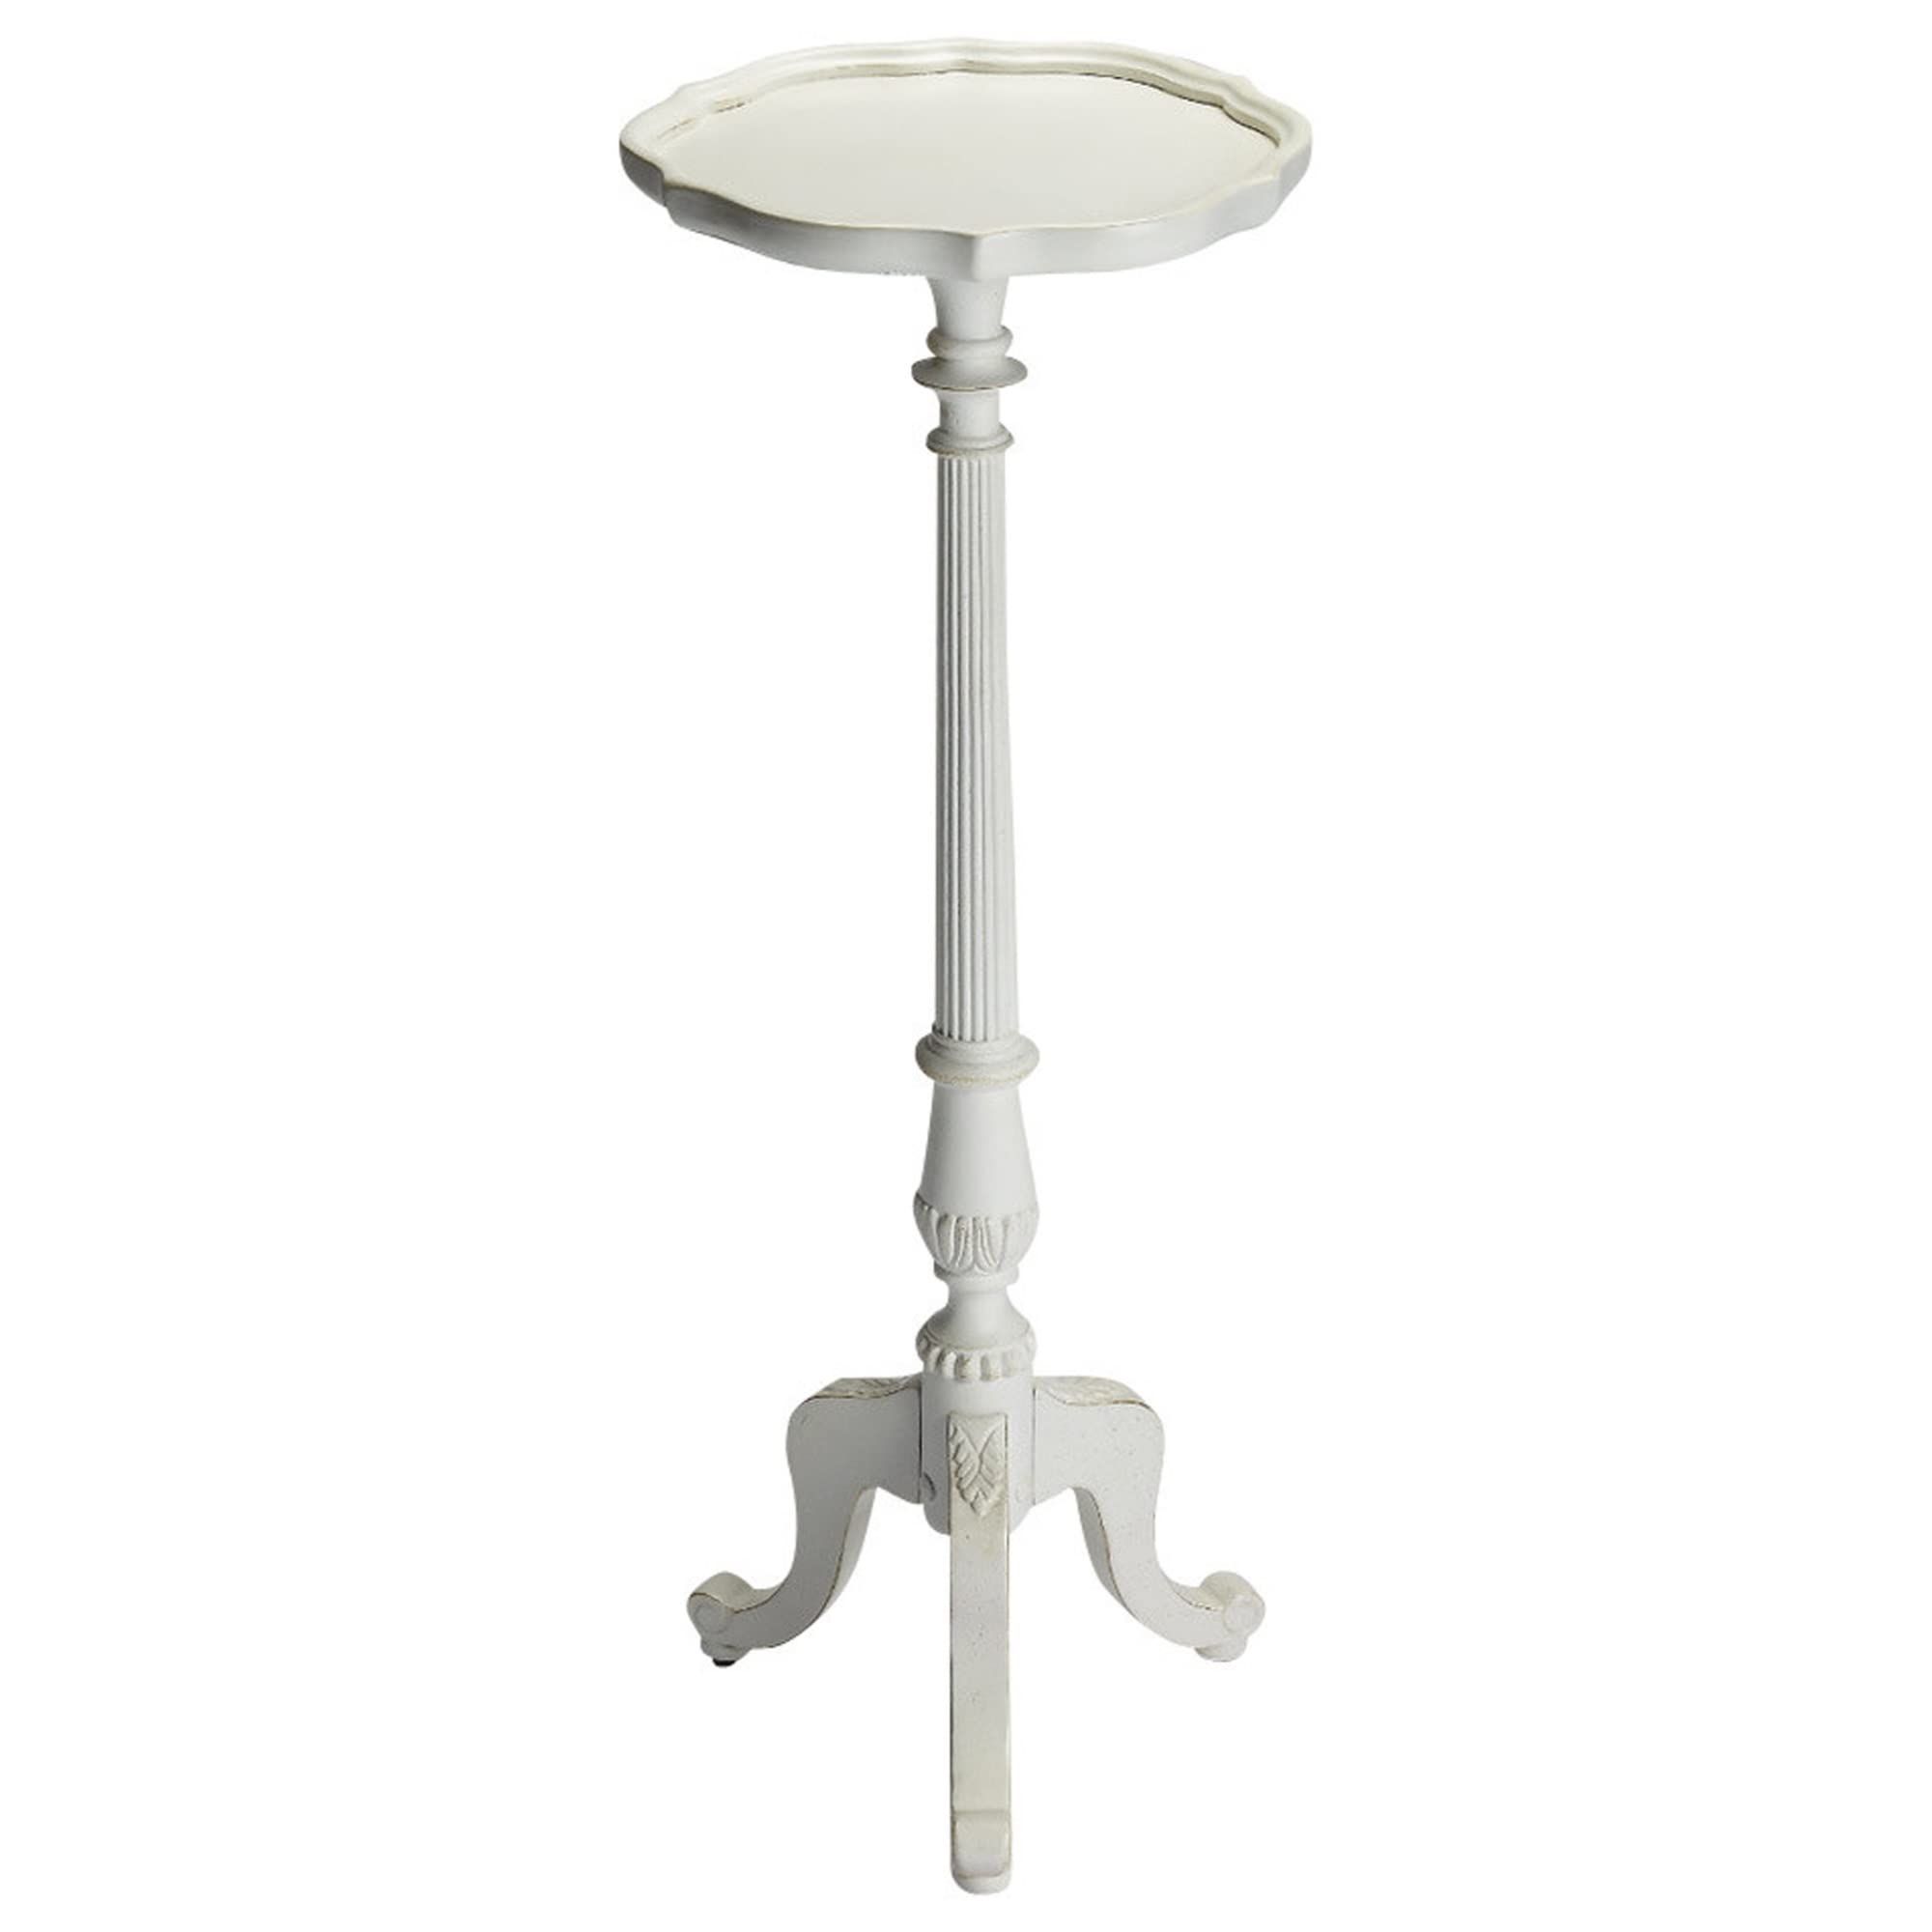 Pedestal Plant Stands With Regard To Well Known Amazon: Woybr Pedestal Plant Stand : Patio, Lawn & Garden (View 8 of 10)